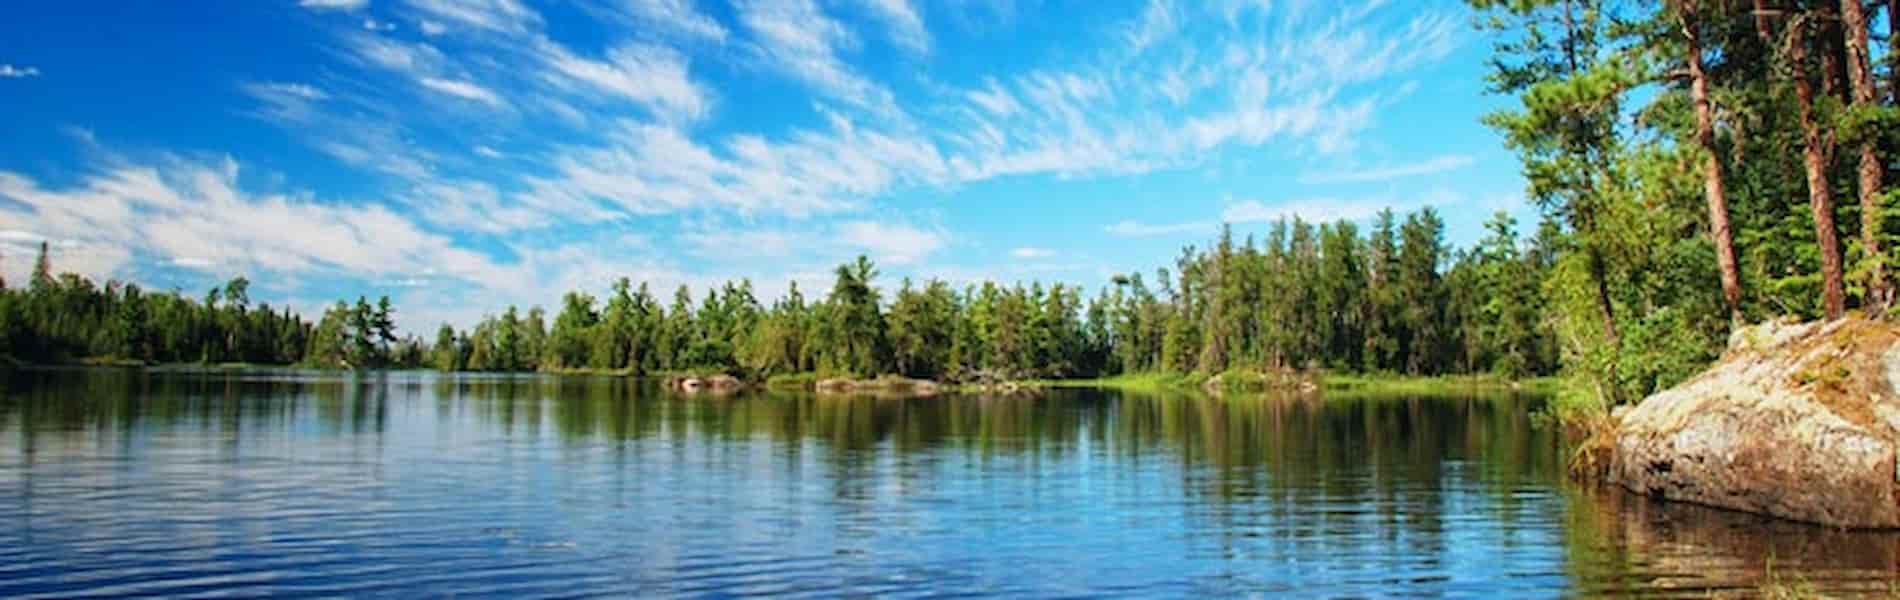 wide-shot-of-lake-on-a-sunny-day-with-pine-shoreline-in-background